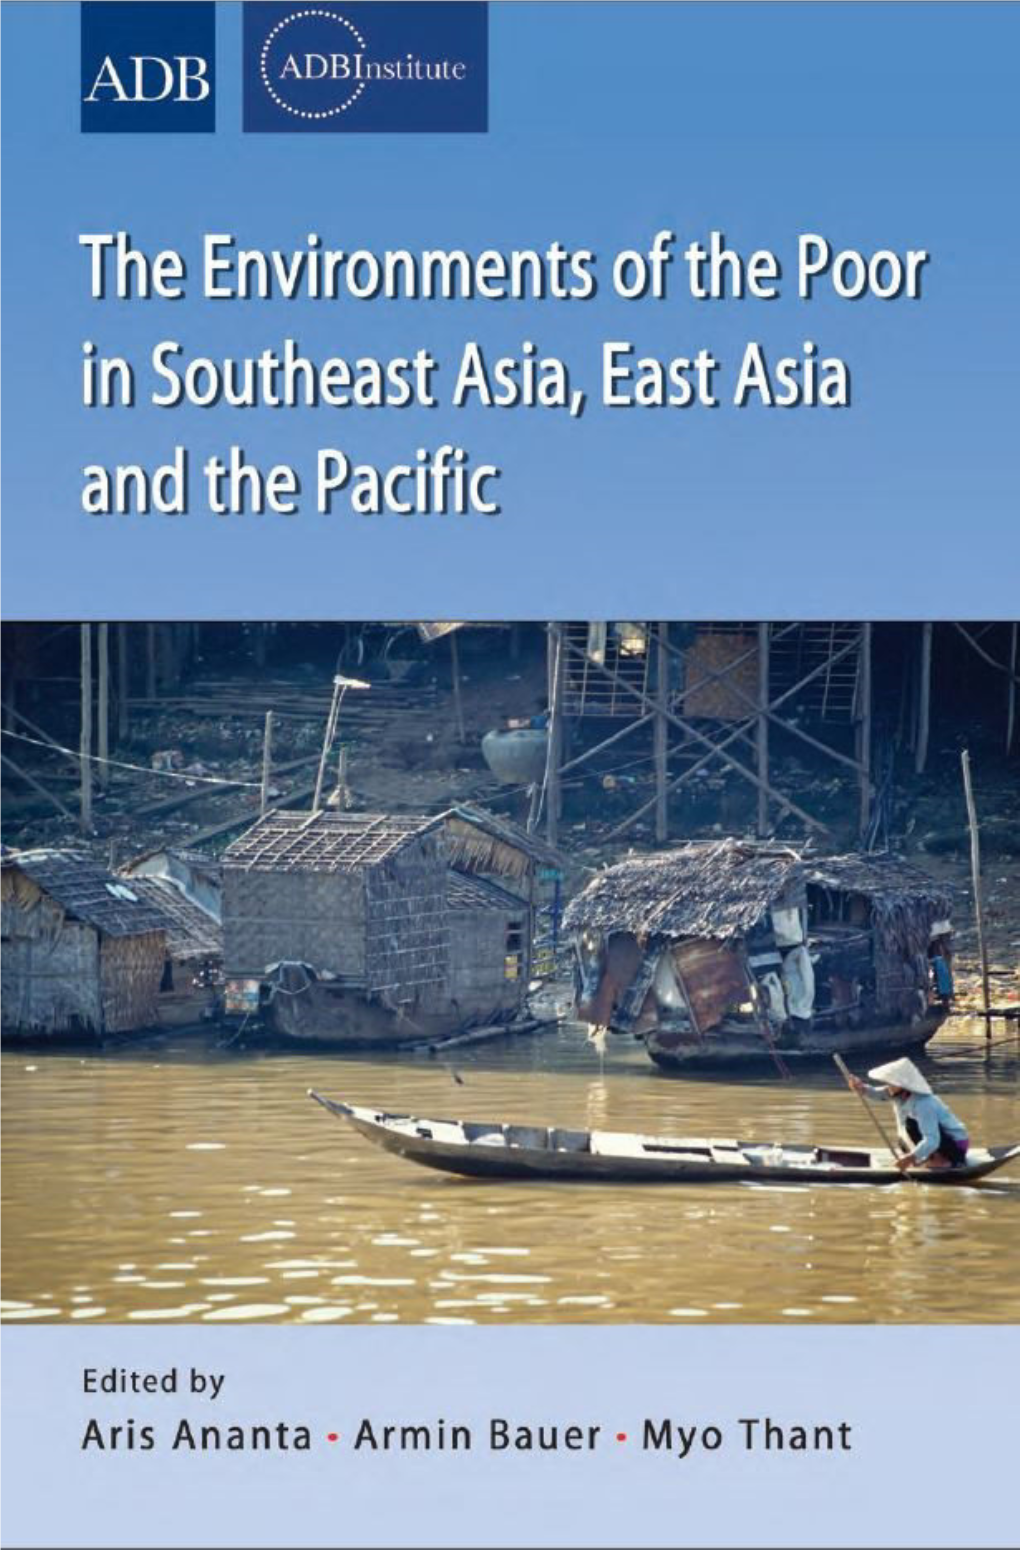 The Environments of the Poor in Southeast Asia, East Asia and The